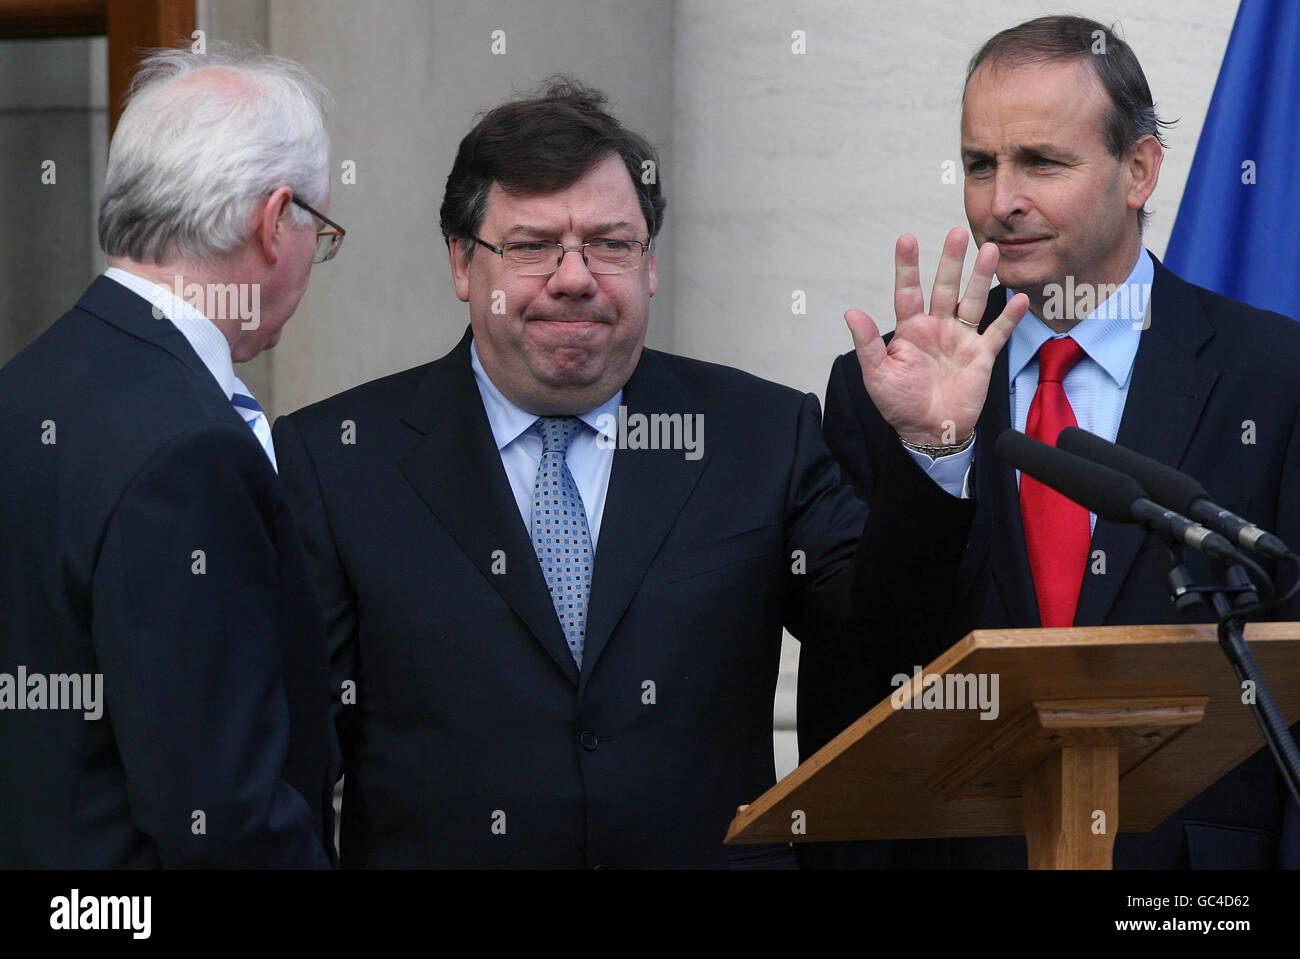 L-R Enviroment Minister John Gormley Taoiseach Brian Cowen and Foreign Affairs Minister Micheal Martin speaking to the media after claiming victory in the Lisbon Treaty referendum at Government Buildings in Dublin. Stock Photo